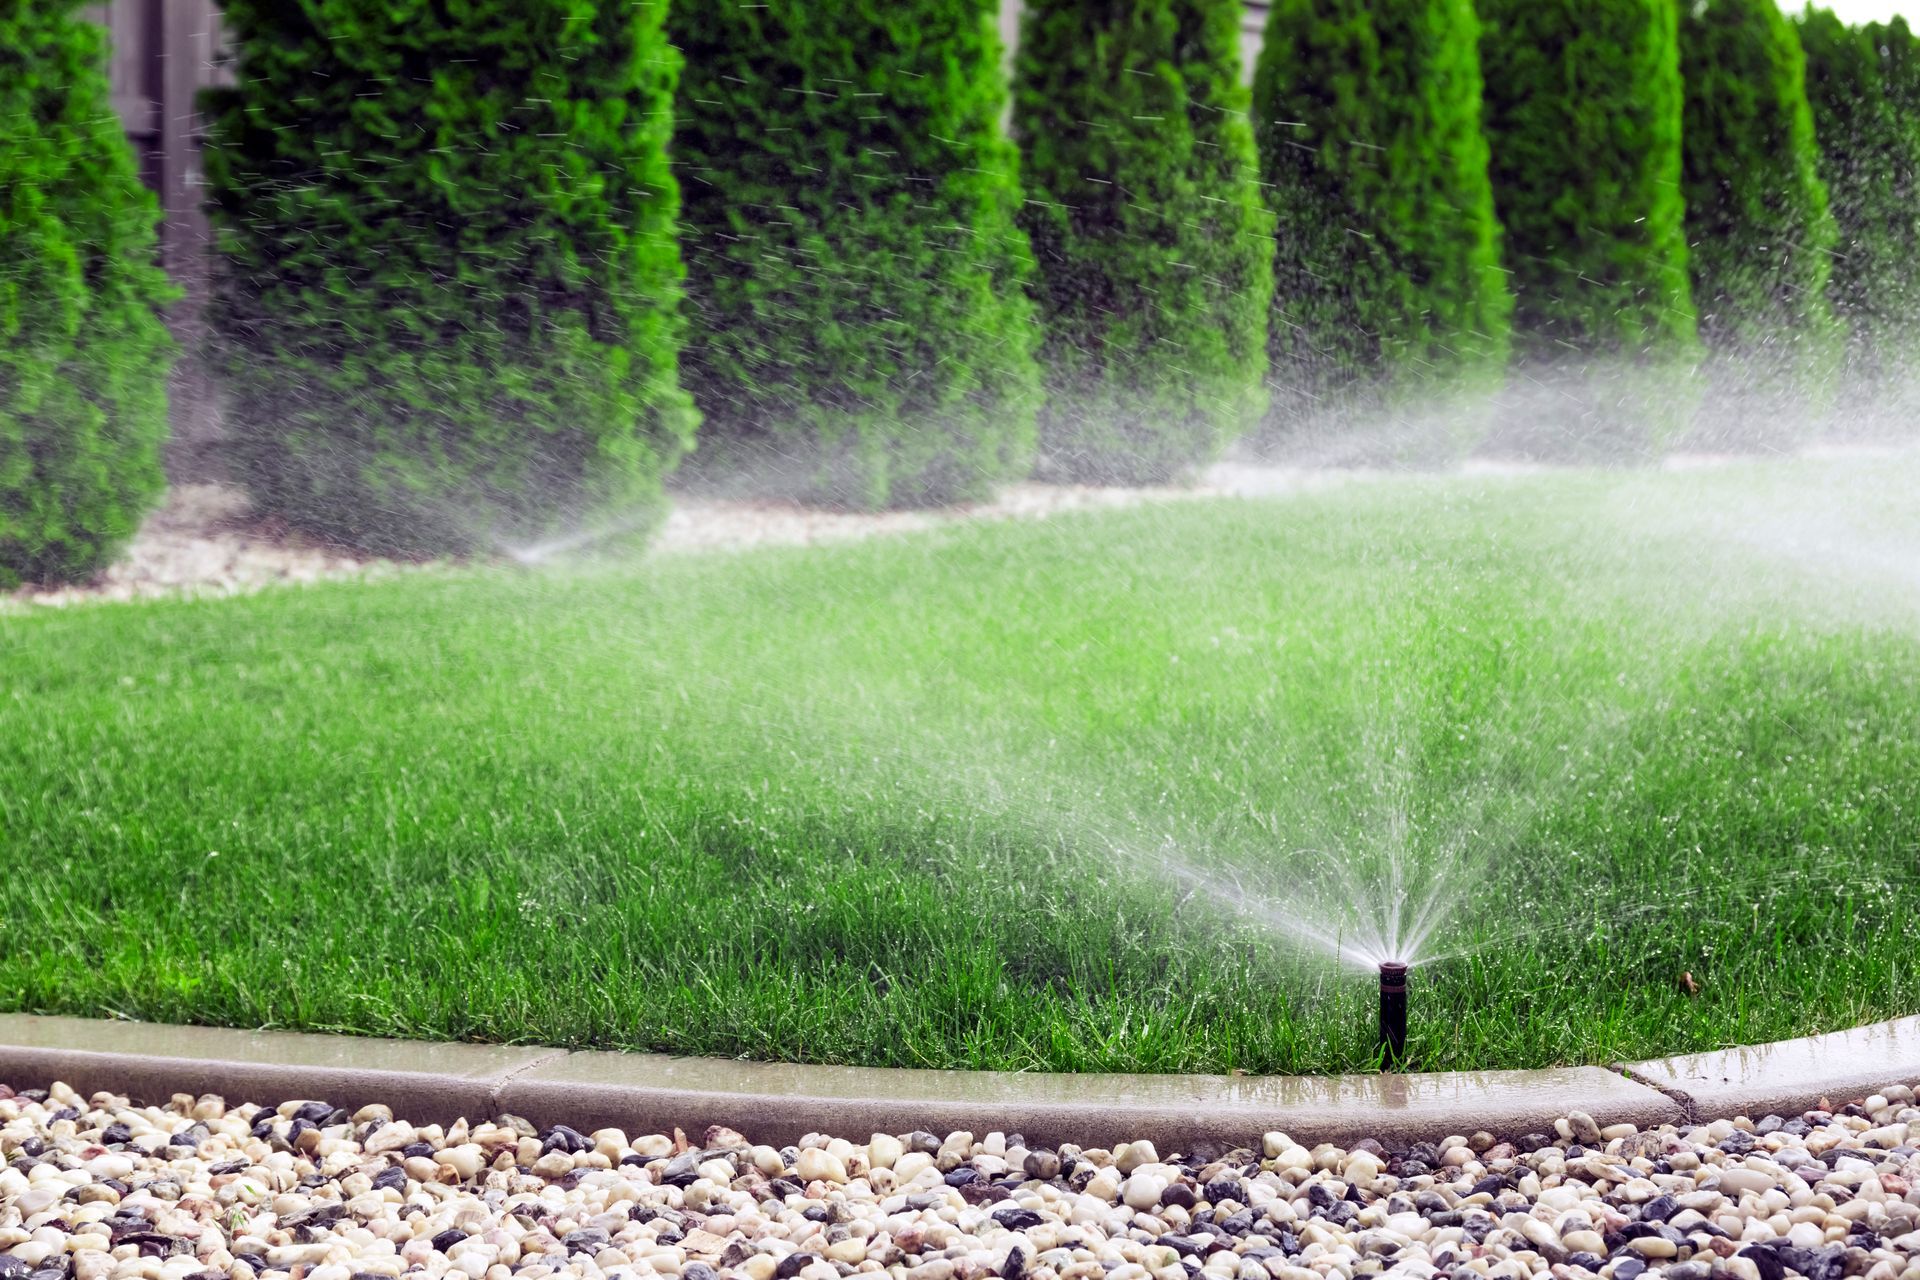 Residential irrigation system repairs